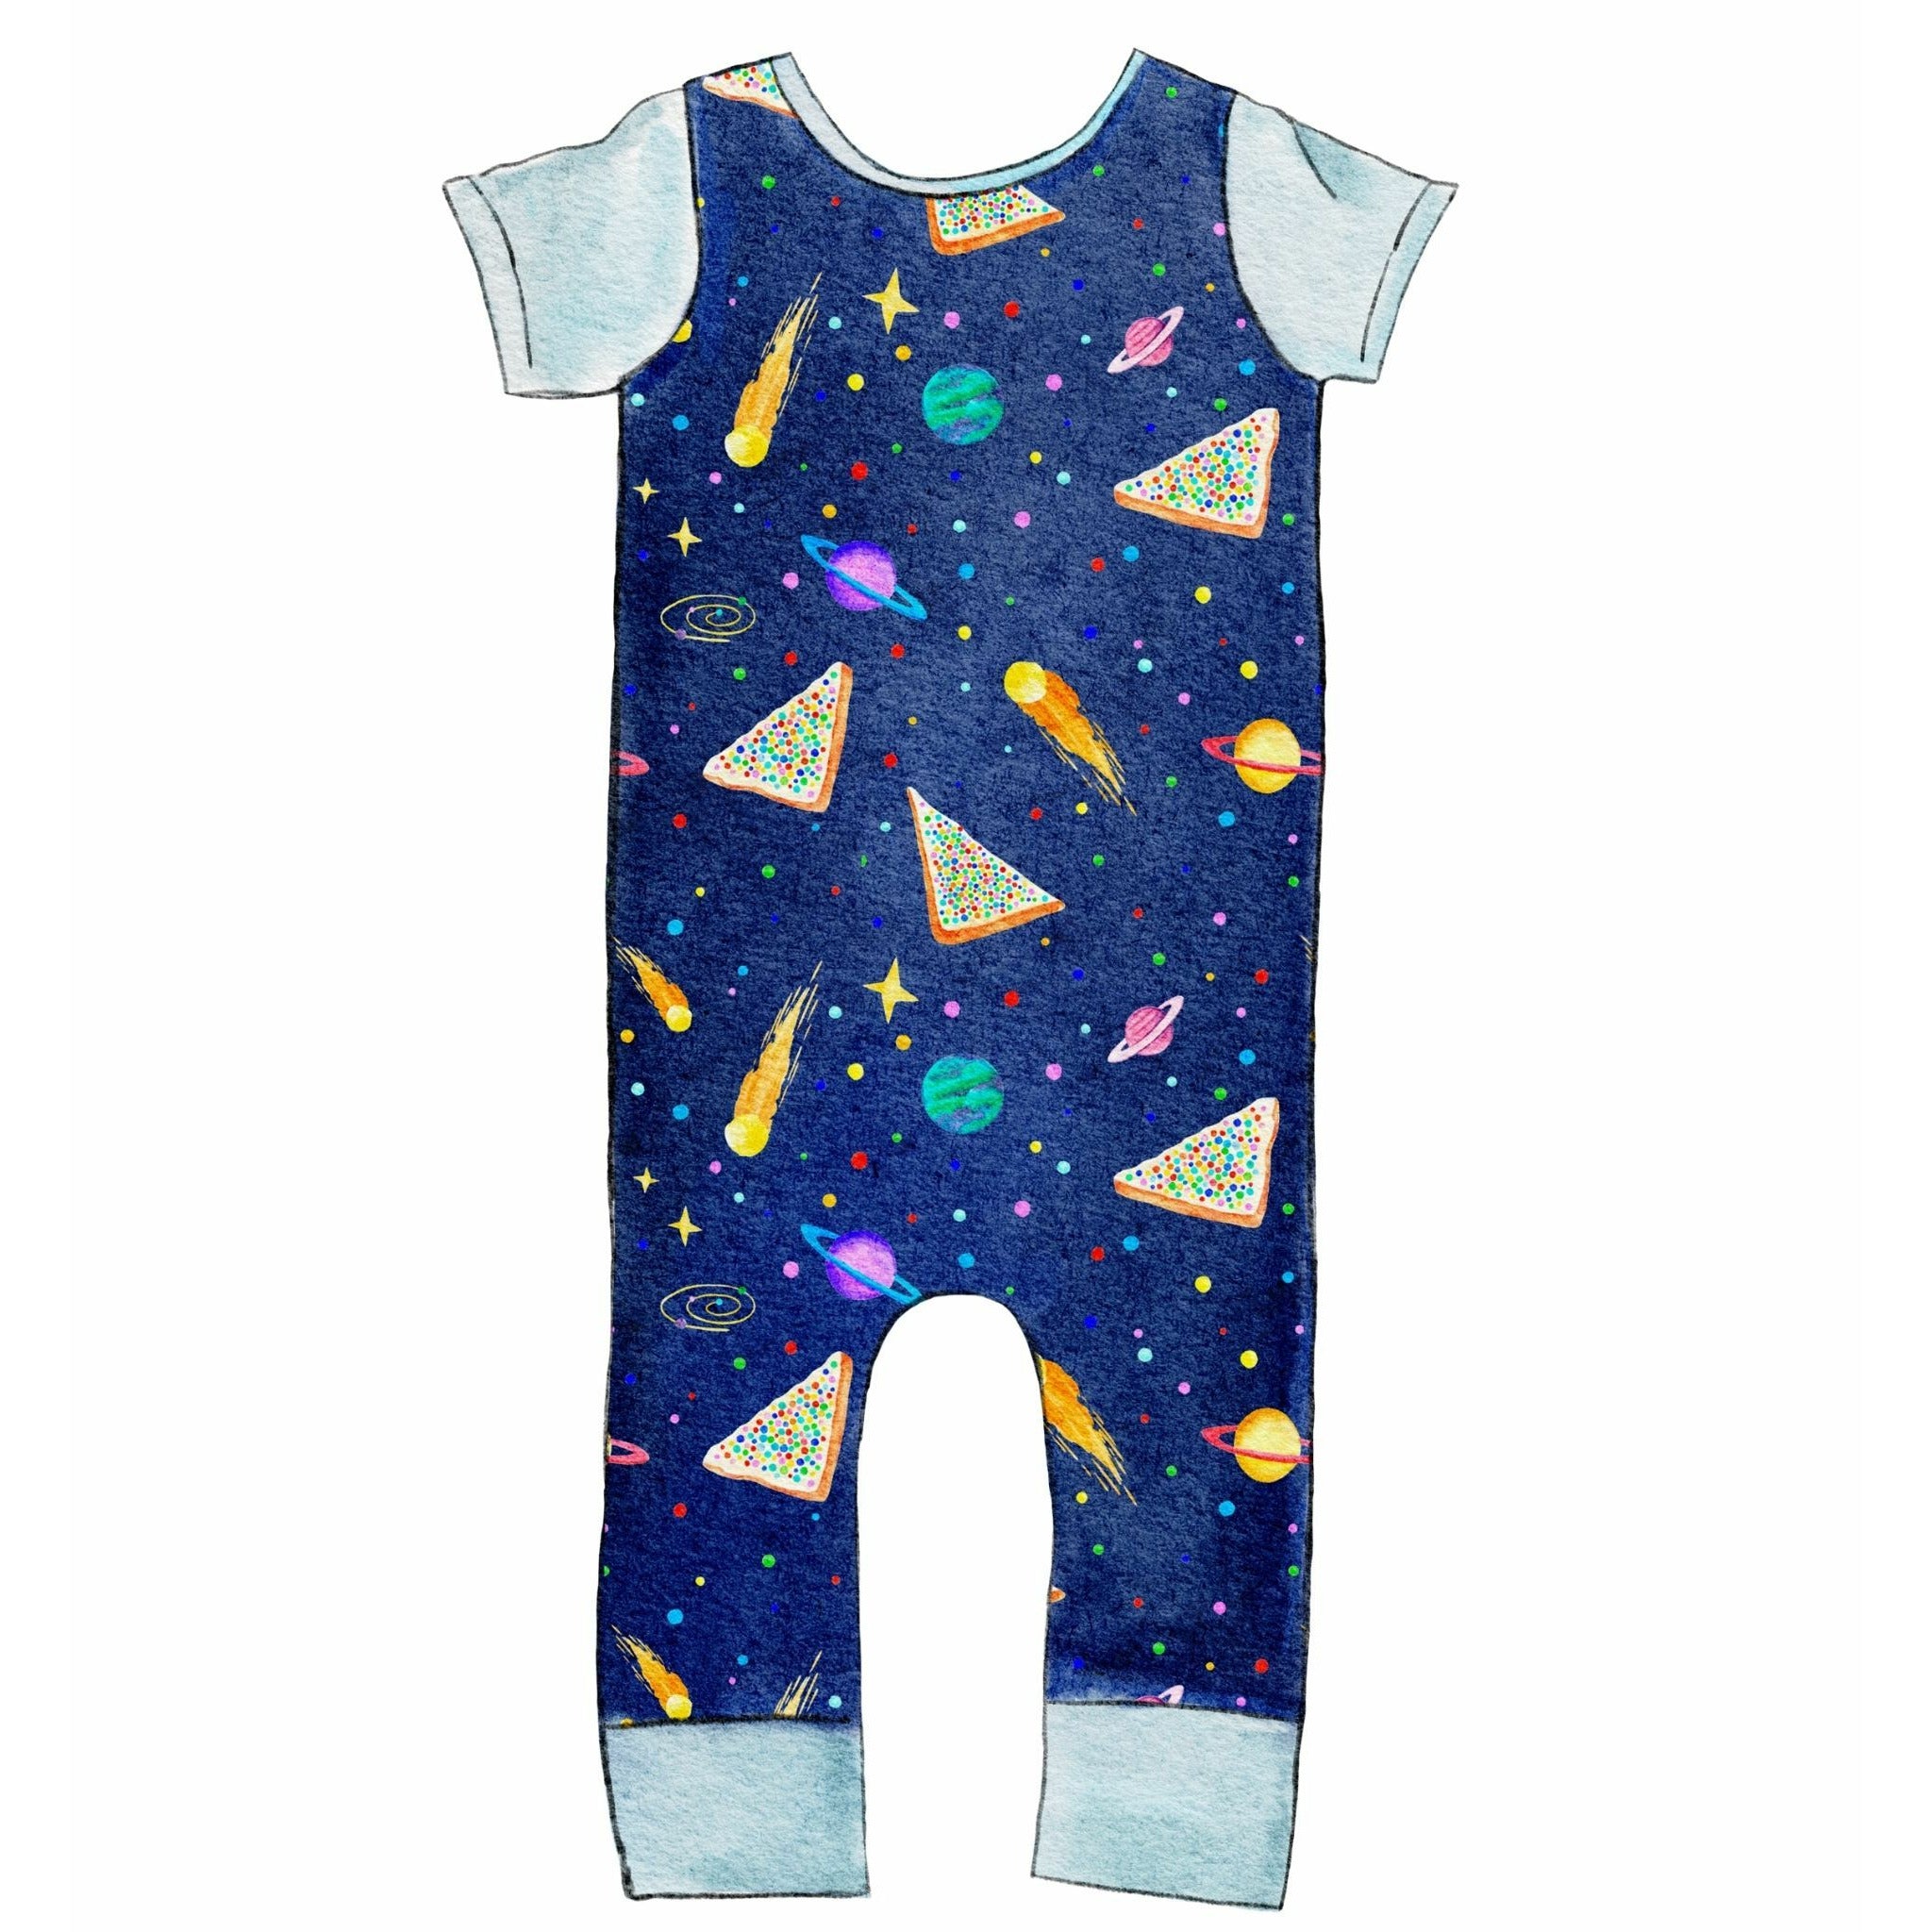 Watercolour image of sprinkle galaxy romper with fairy bread and planets